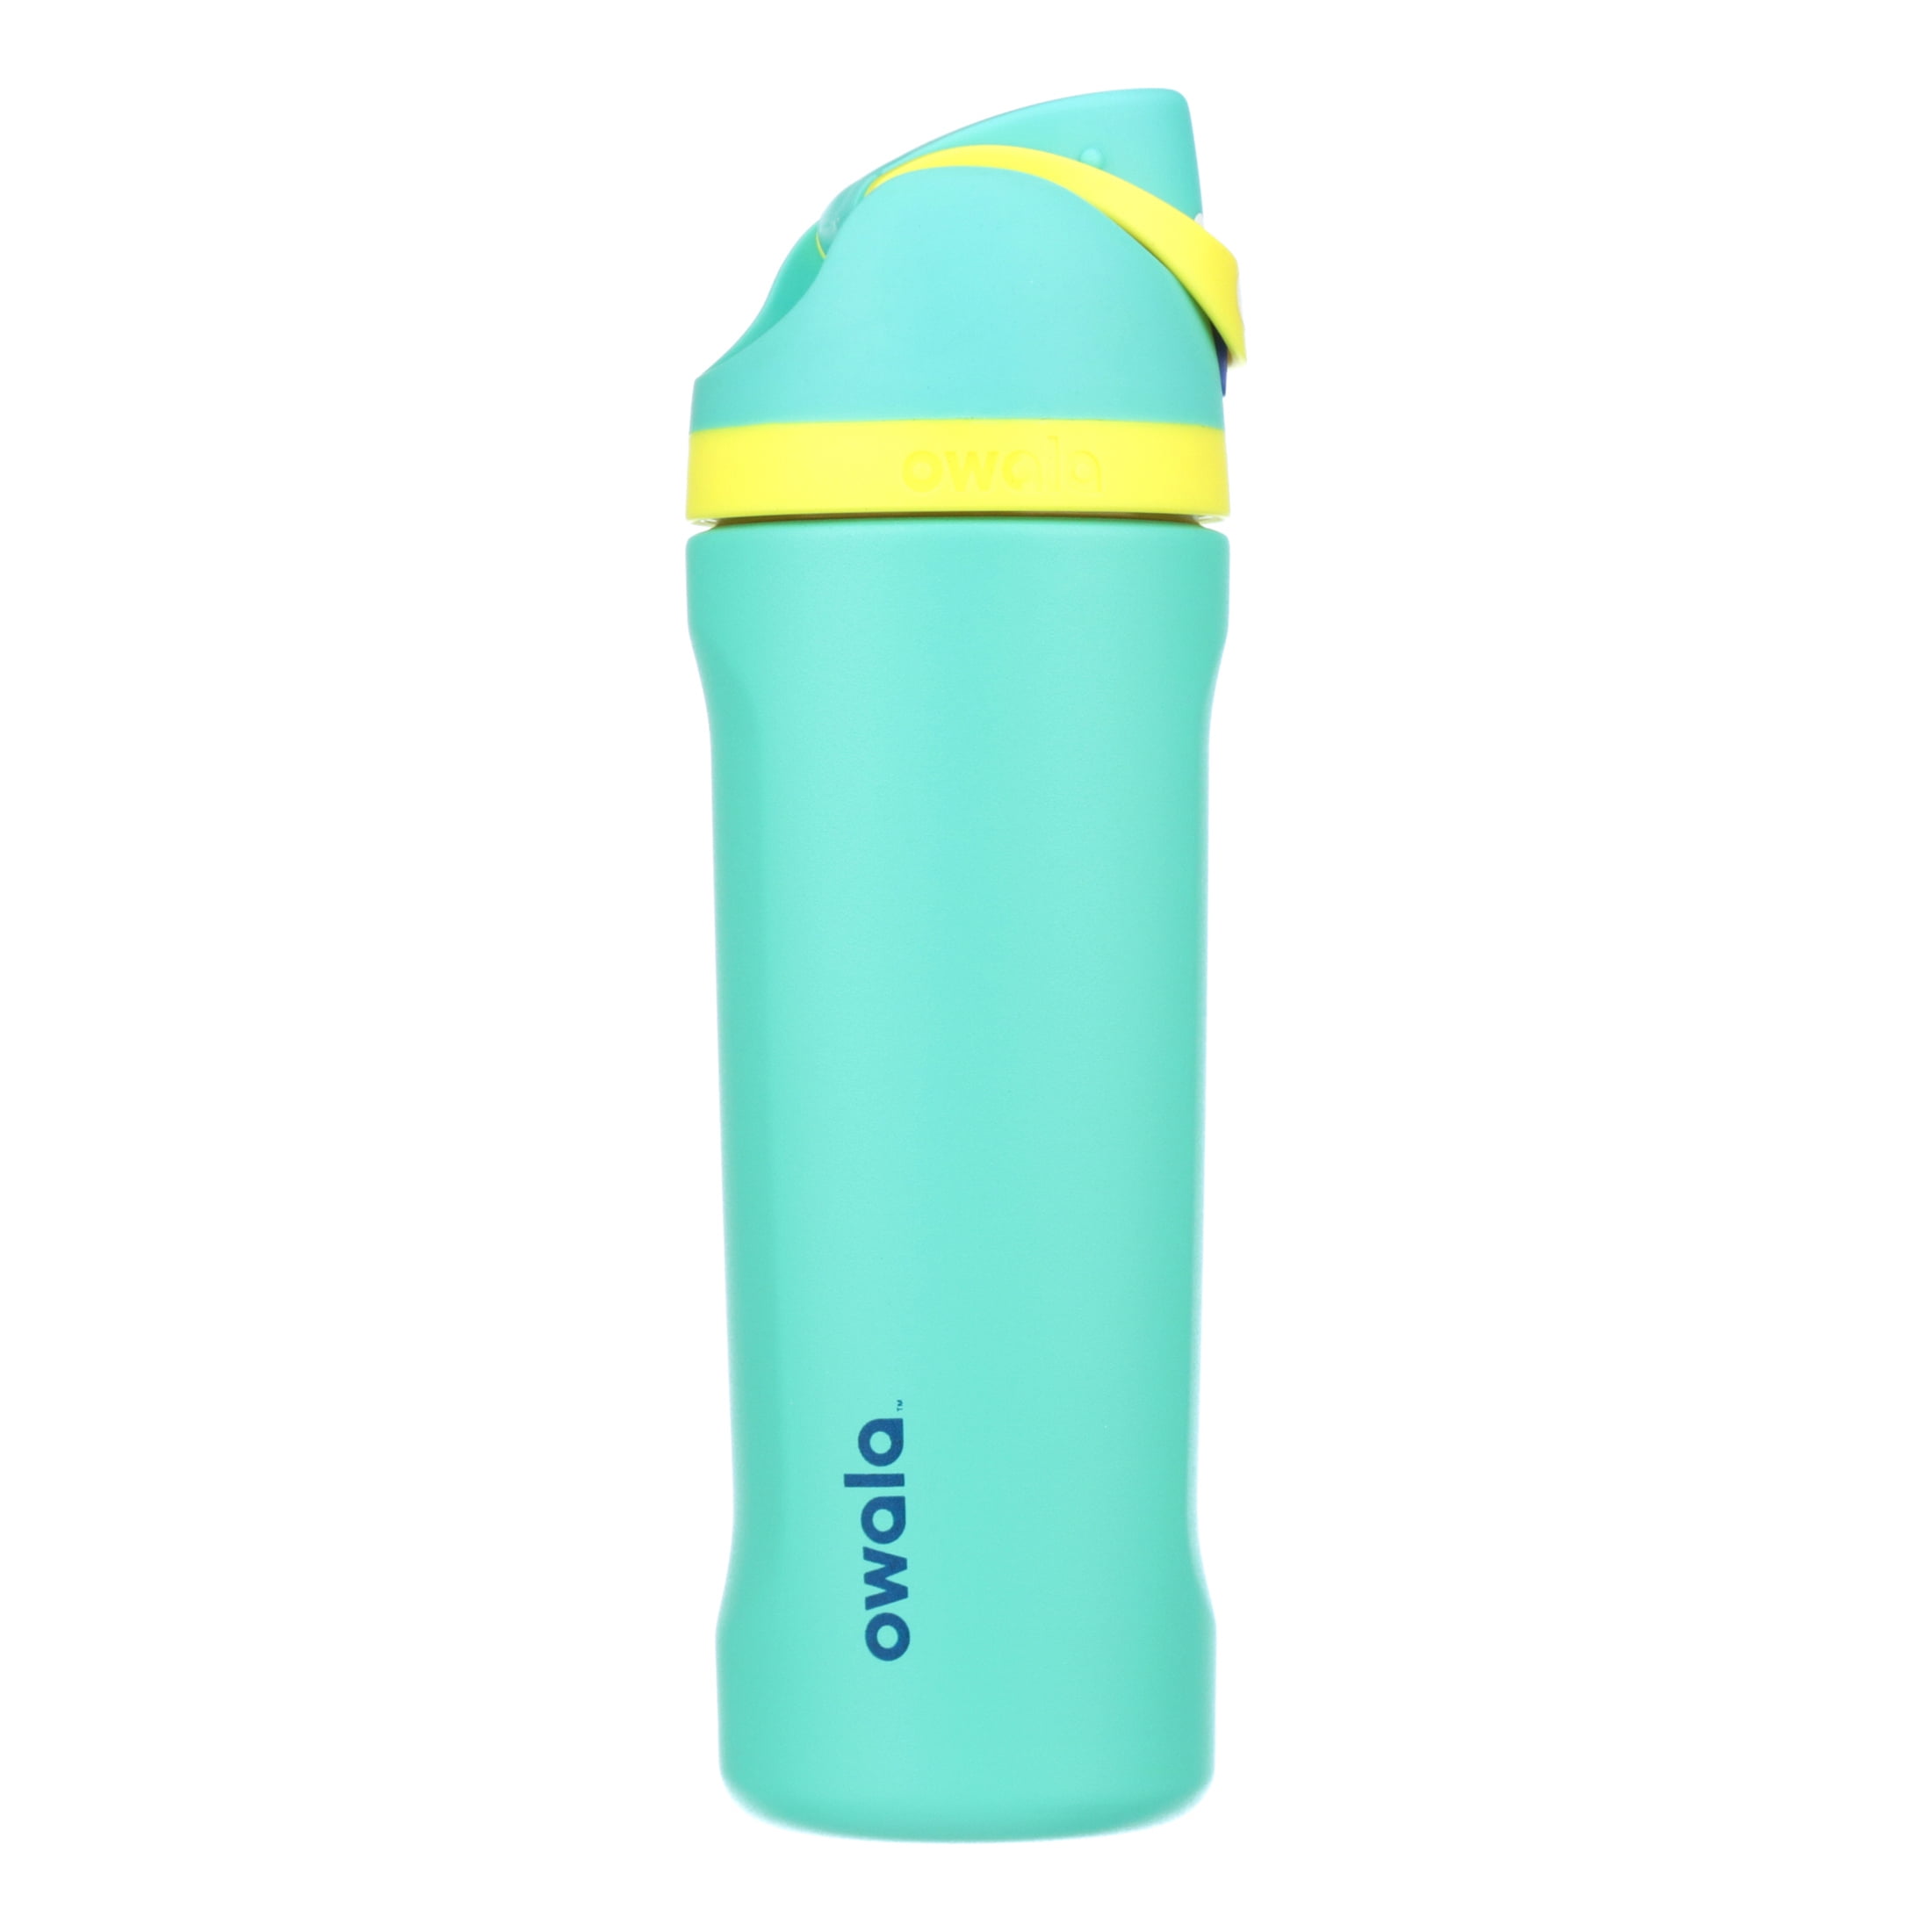 New! OWALA FreeSip Insulated Stainless Steel Water Bottle 19 oz $7